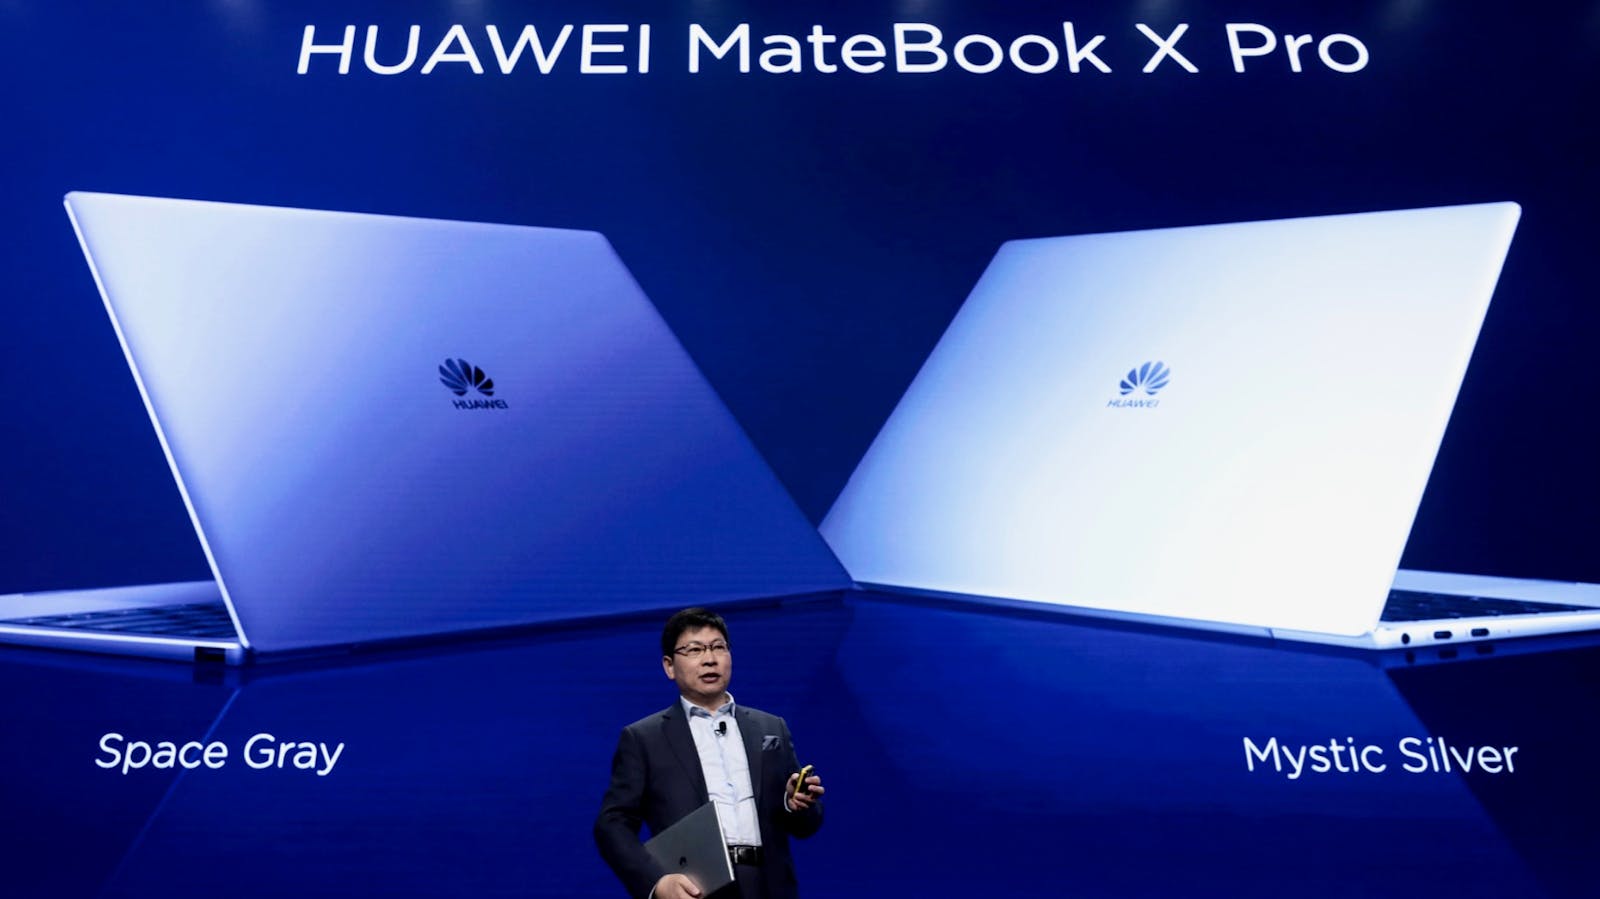 Richard Yu, CEO of Huawei's consumer group, presented the MateBook X Pro laptop in Barcelona last year.